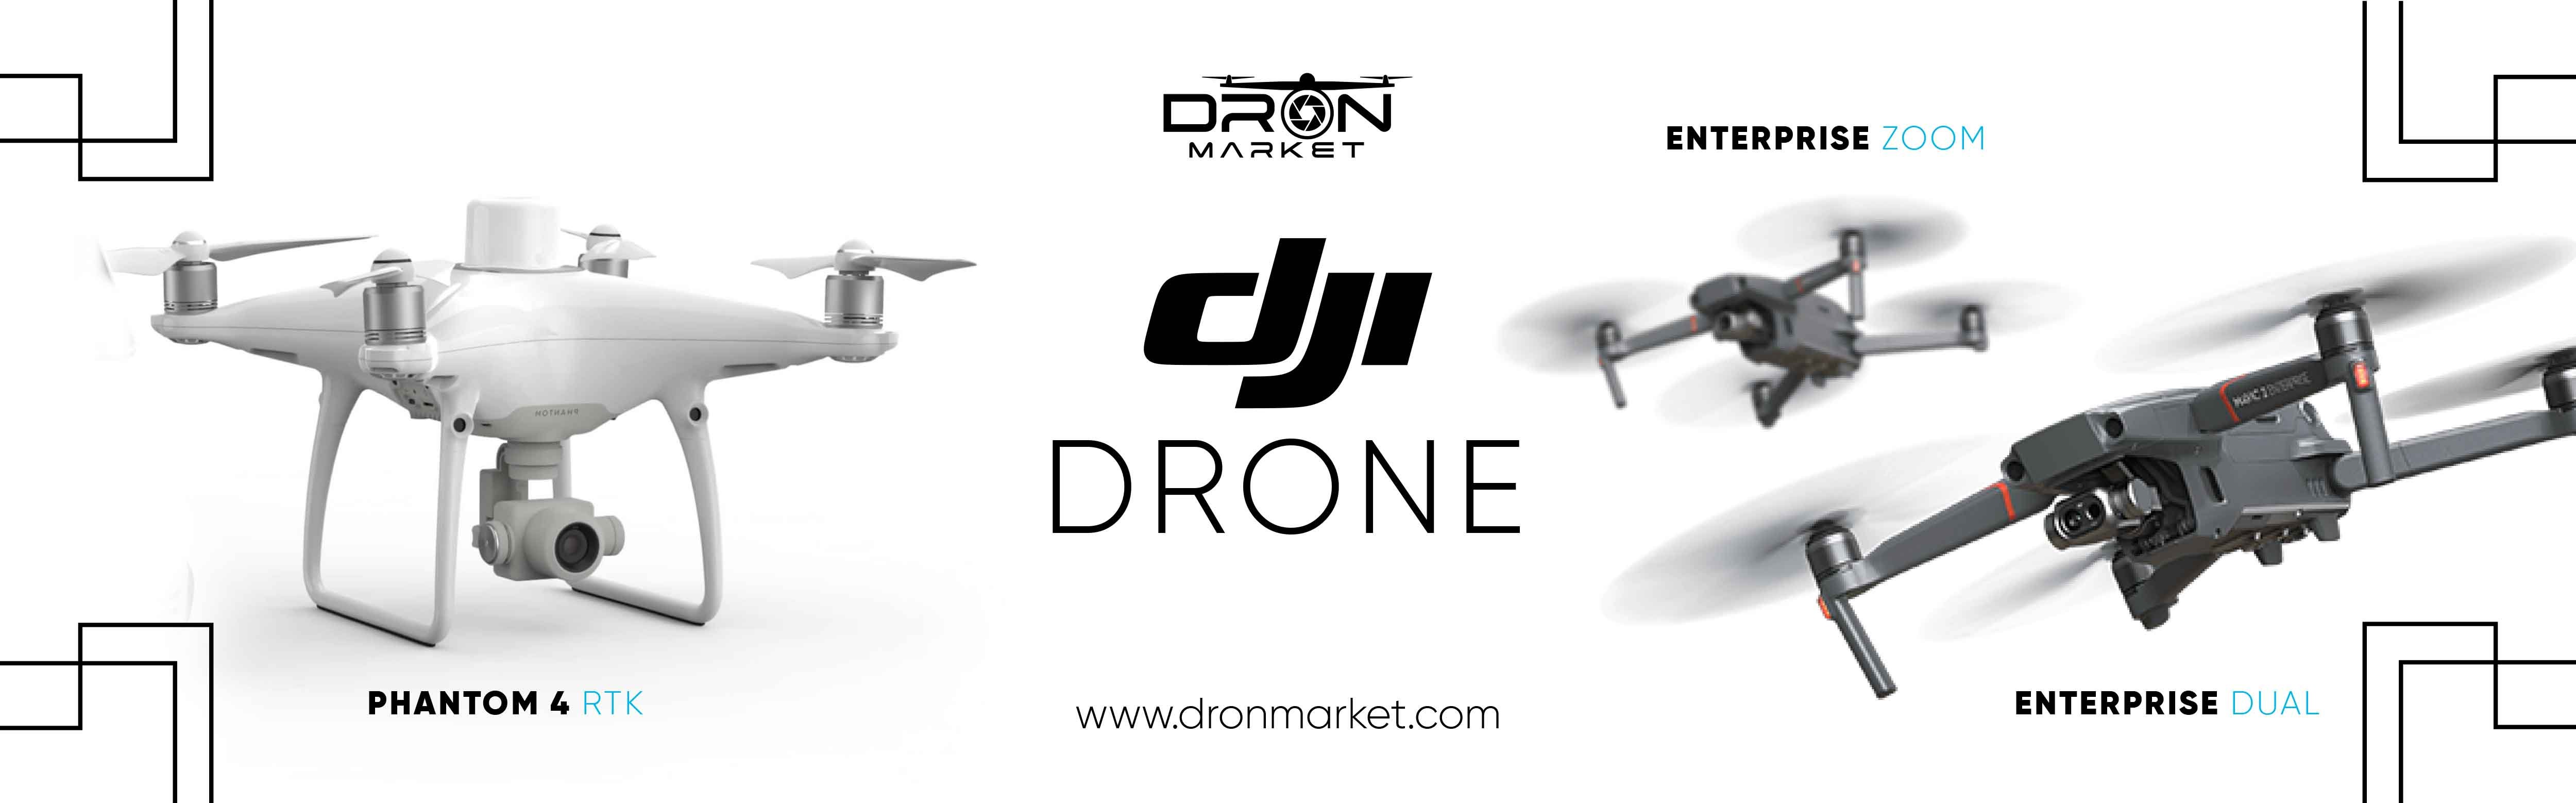 DJI drone models are waiting for you at dronmarket.com at the most affordable prices.